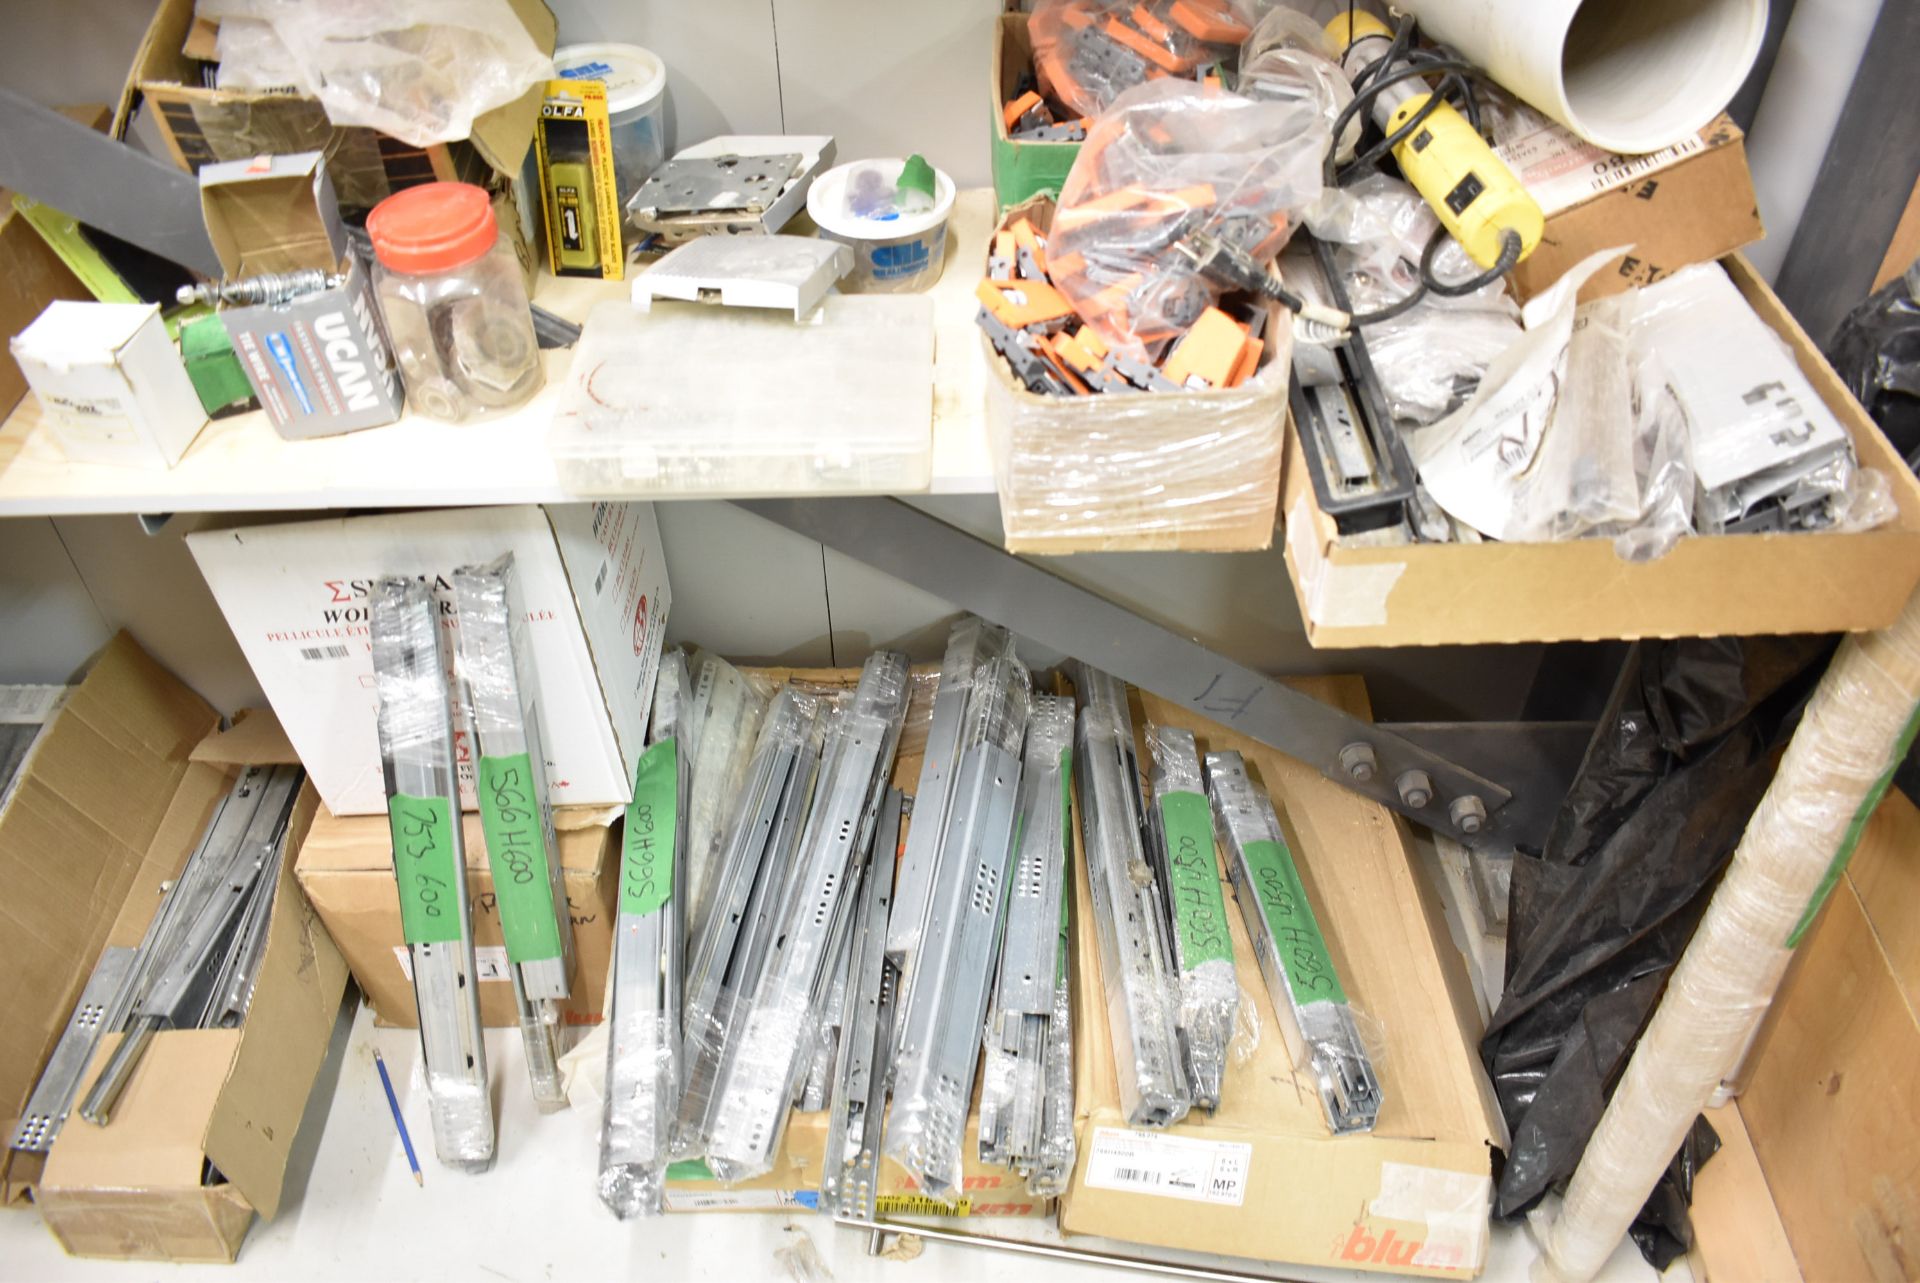 LOT/ CONTENTS OF STORAGE ROOM CONSISTING OF BLUM CABINET HARDWARE, SEALS AND SUPPLIES [RIGGING FEE - Image 2 of 18